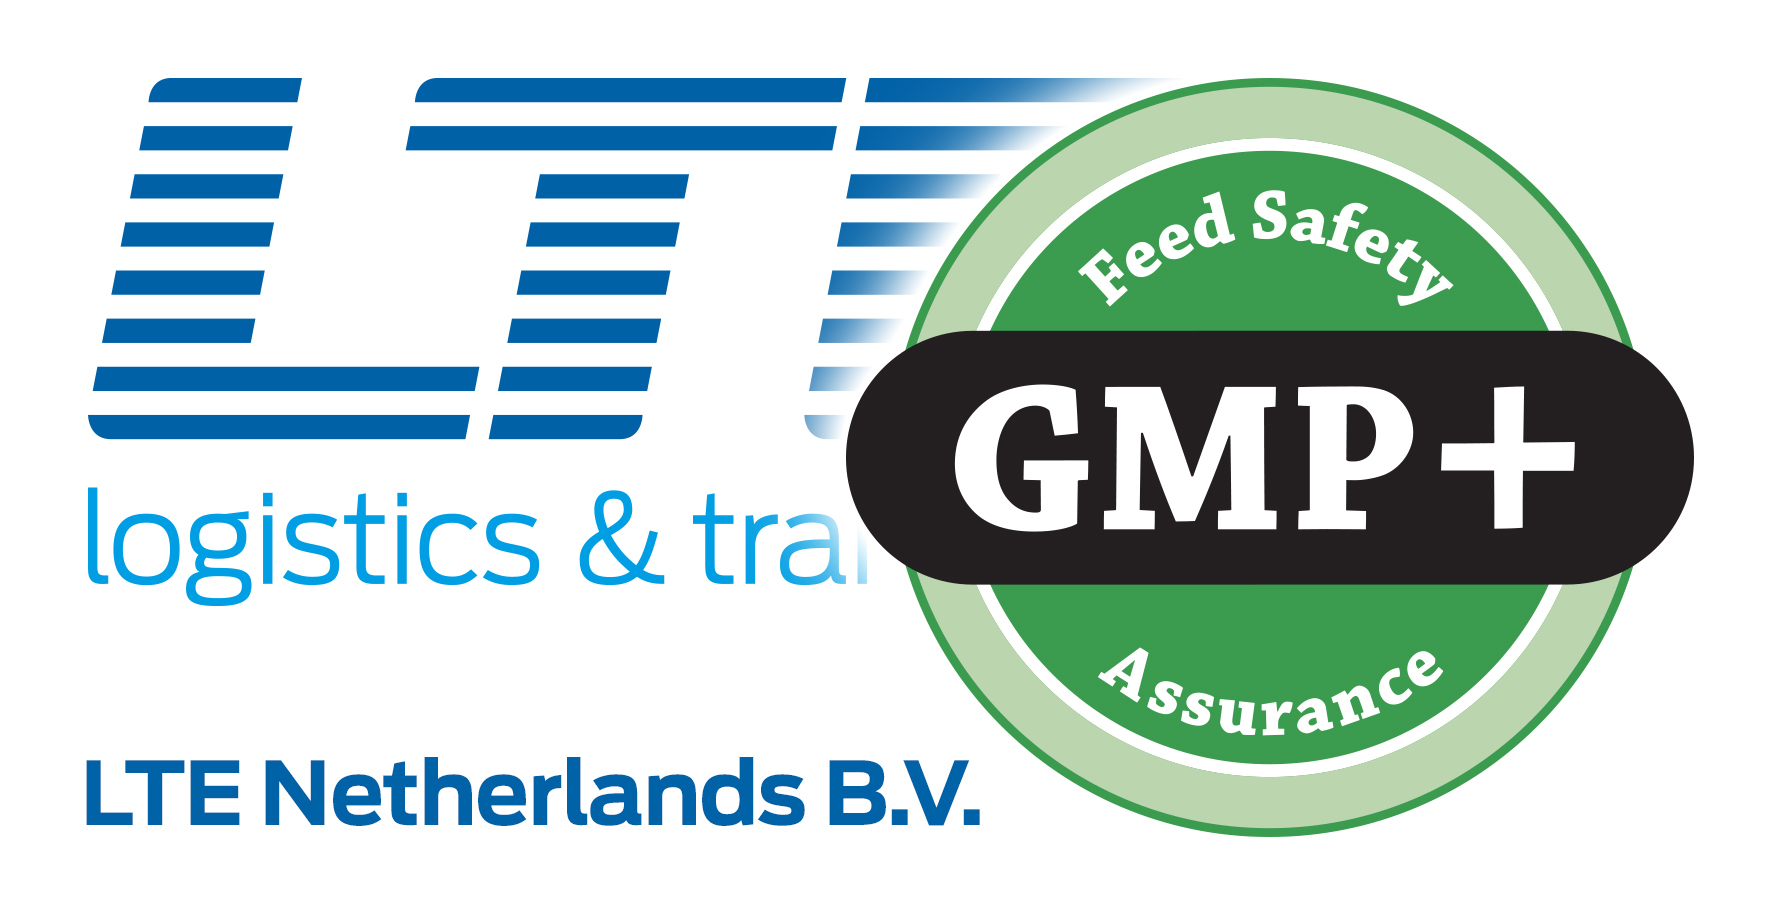 LTE NL | Quality added - GMP+ certified transports